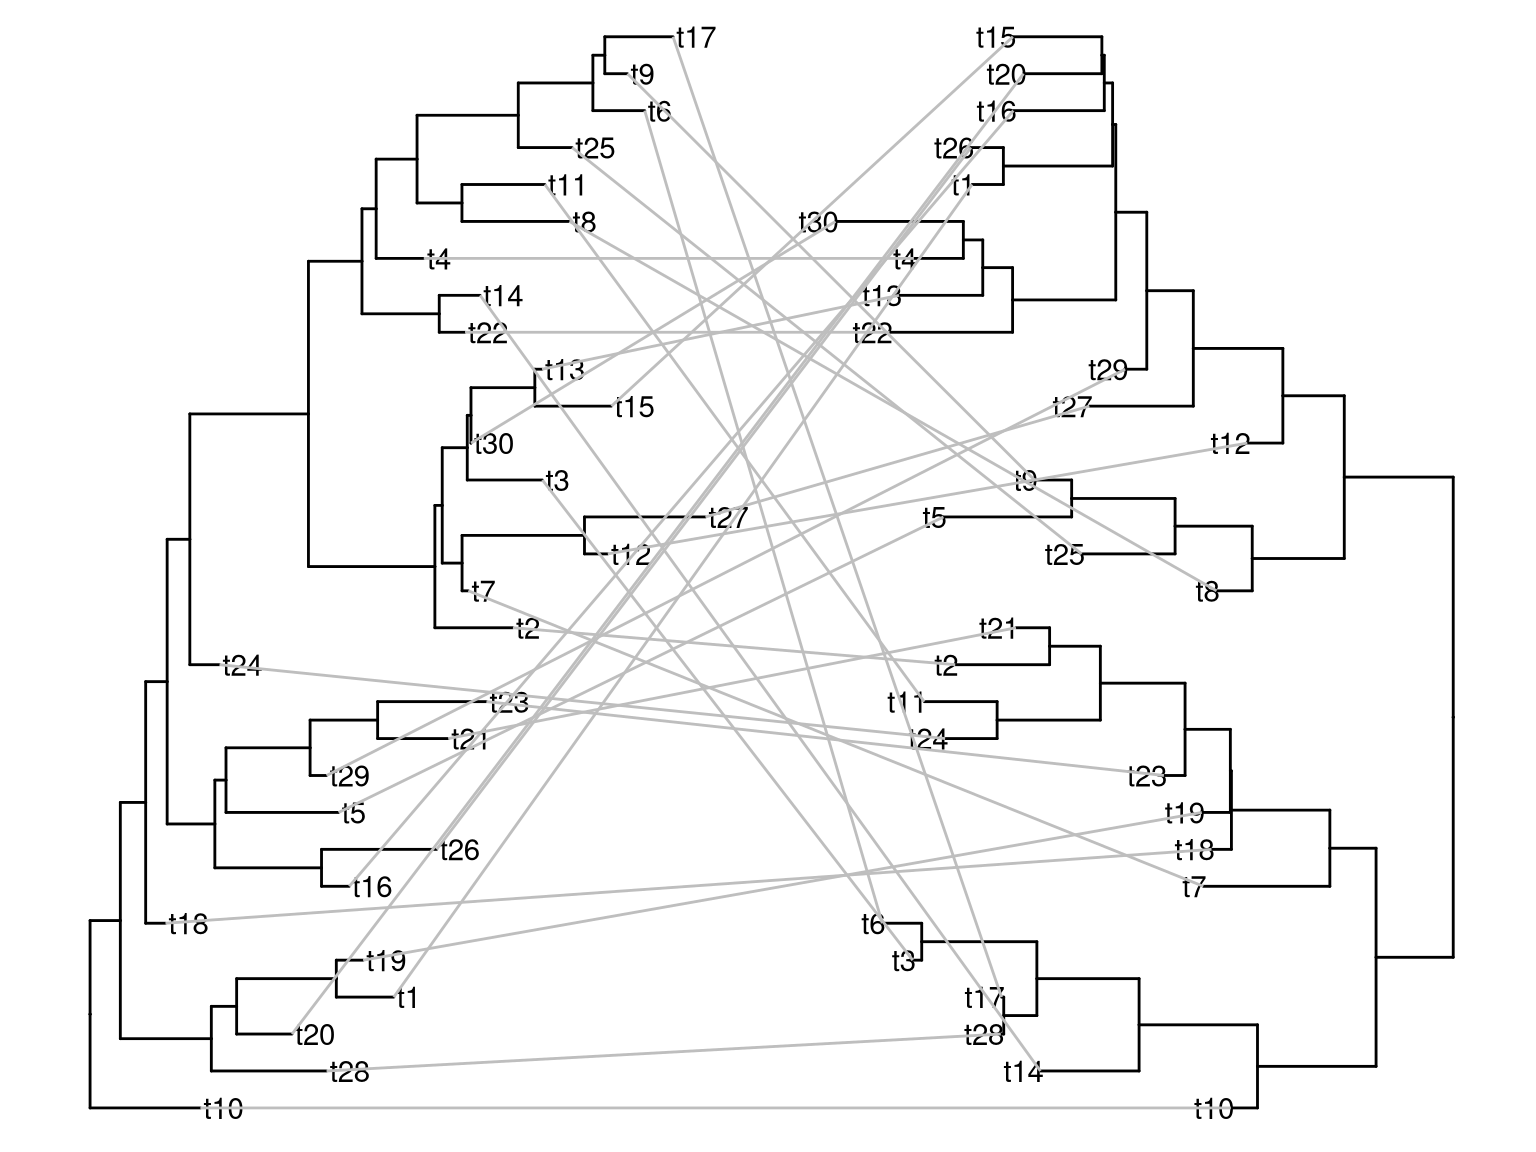 Plot two phylogenetic trees face to face. Plotting a tree using ggtree() (left hand side) and subsequently add another layer of tree by geom_tree() (right hand side). The relative positions of the plotted trees can be manual adjusted and adding layers to each of the tree (e.g. tip labels) is independent.